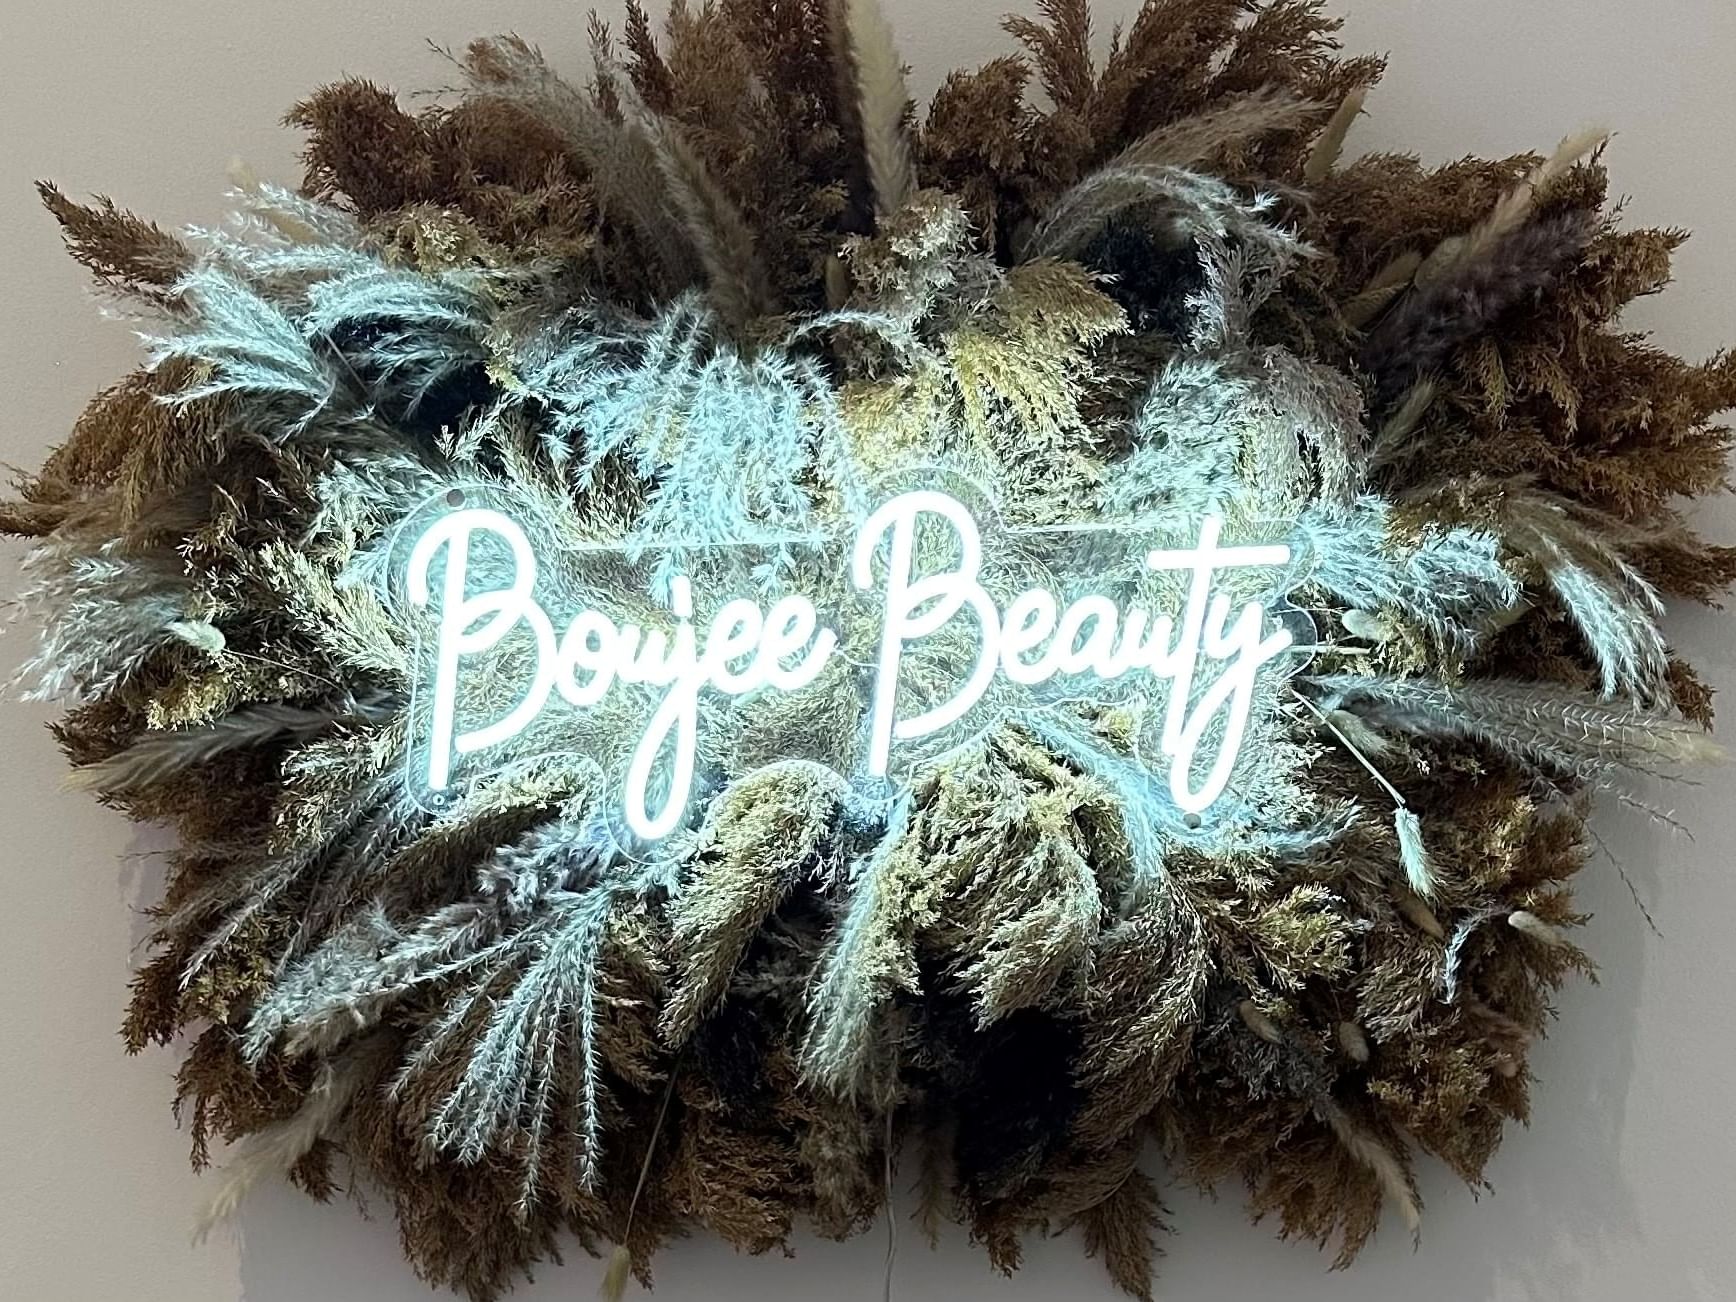 A neon sign of Boujee Beauty hung on a wall near Retro Suites Hotel